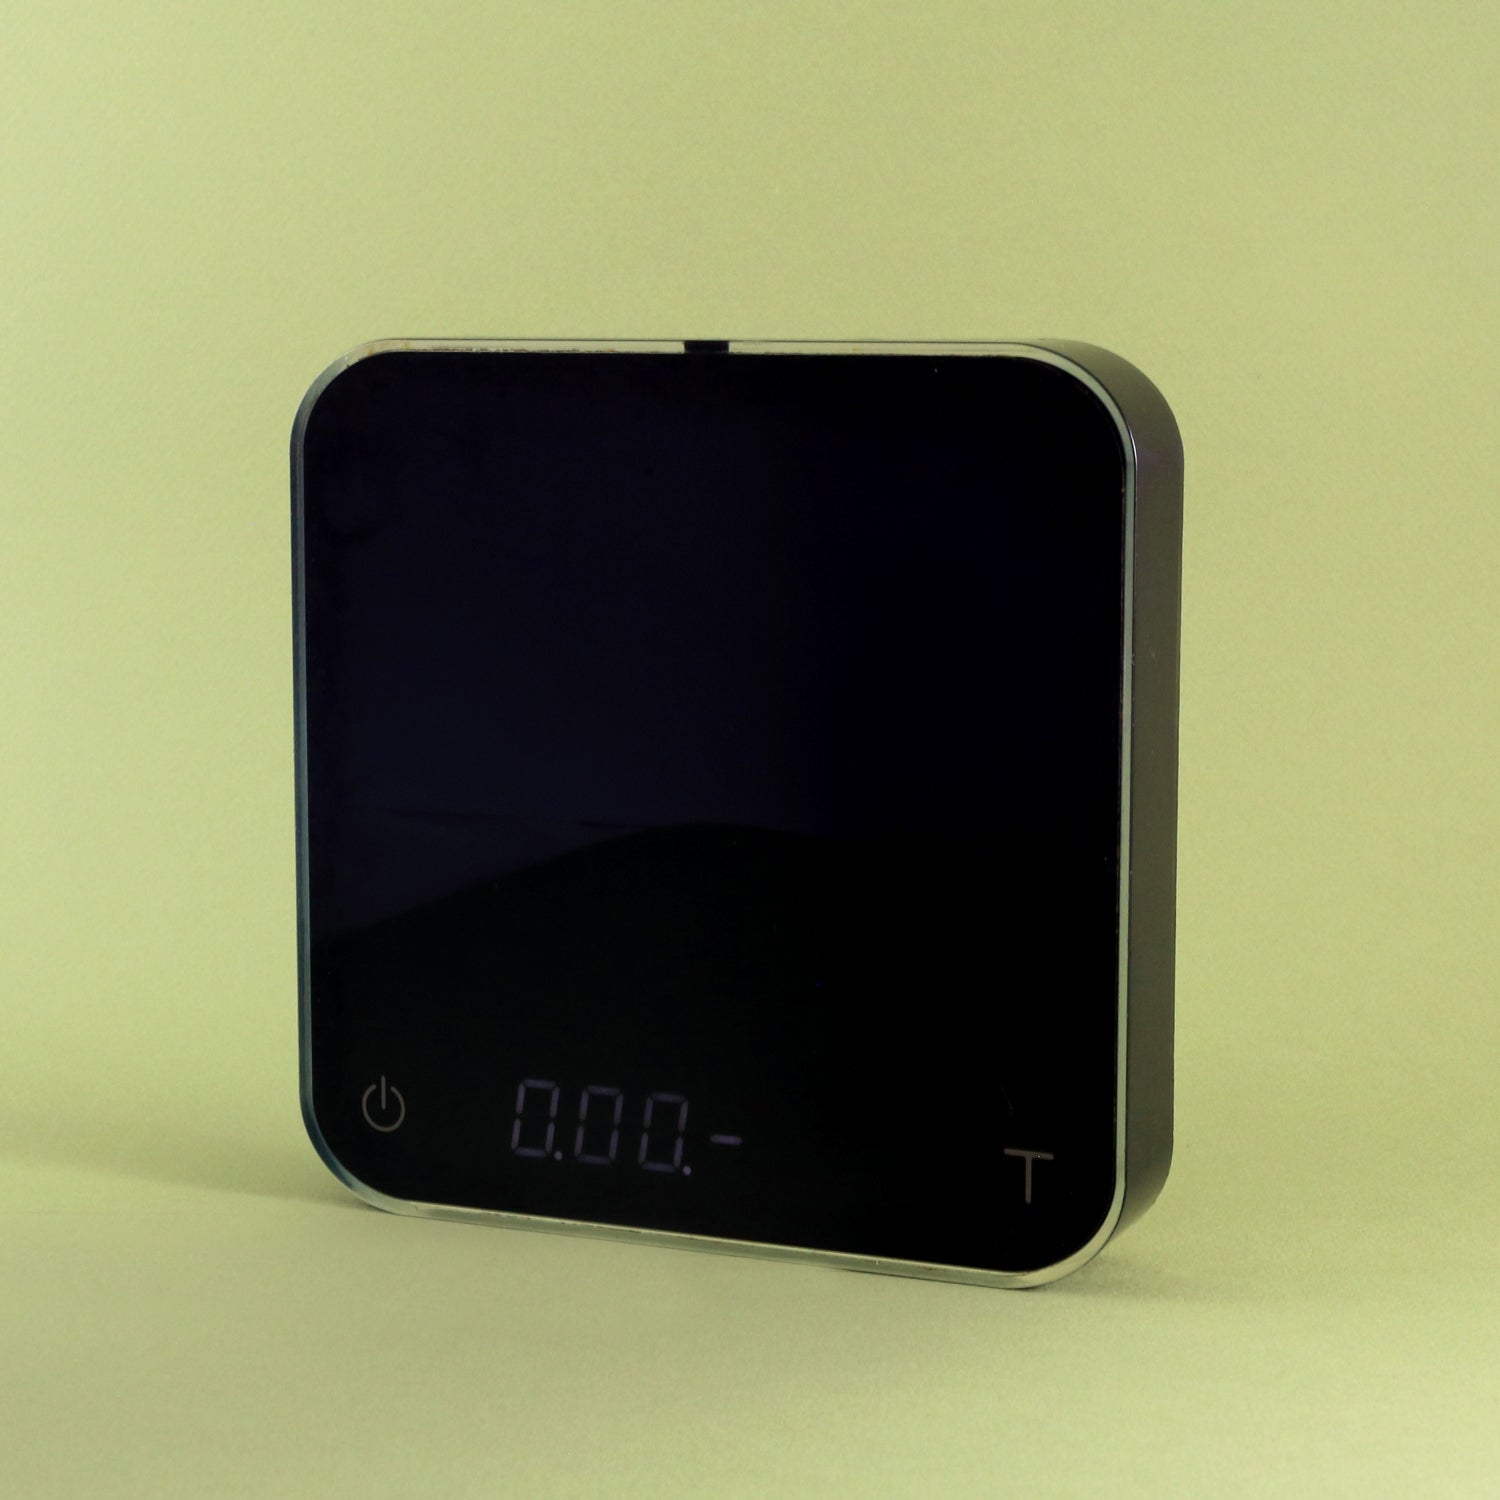 A Tandem Acaia Pearl Scale (Black) with a reflective black surface and a simple display, set against a pale yellow background. The scale shows a reading of zero and is USB rechargeable.